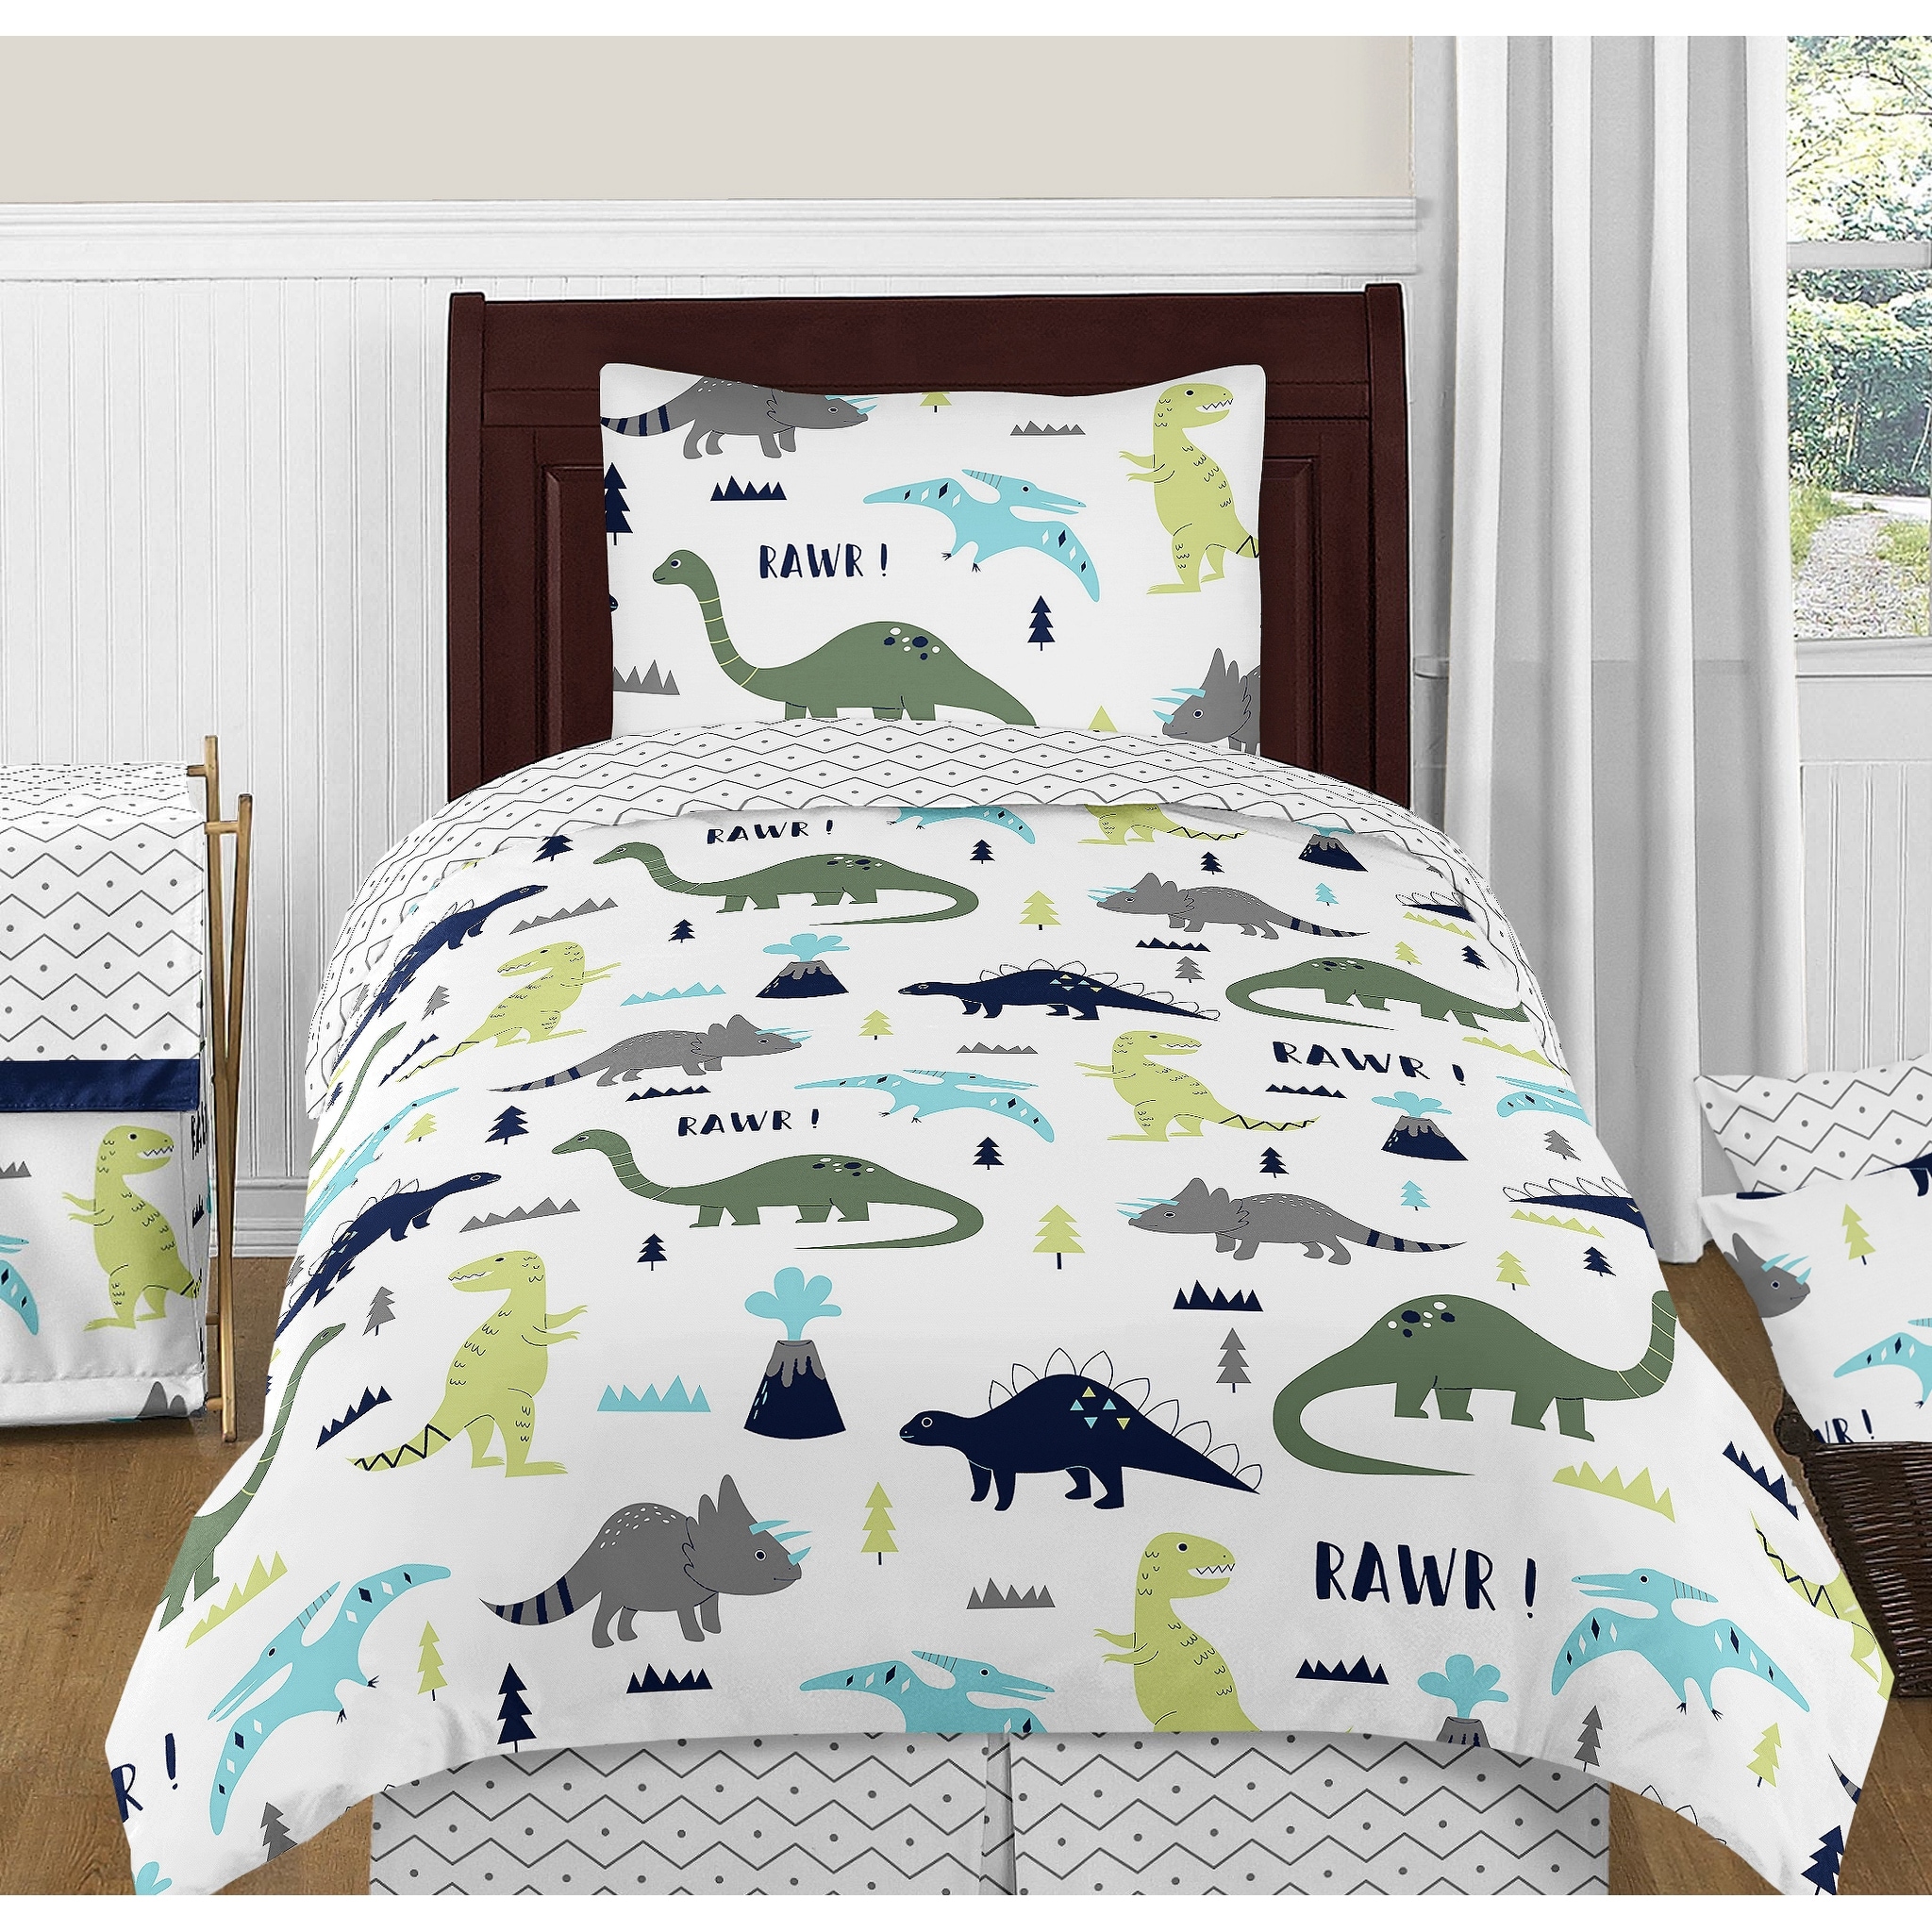 Lampshades Ideal To Match Dinosaurs Duvets Dinosaurs Wallpaper Dinosaurs Decals. 